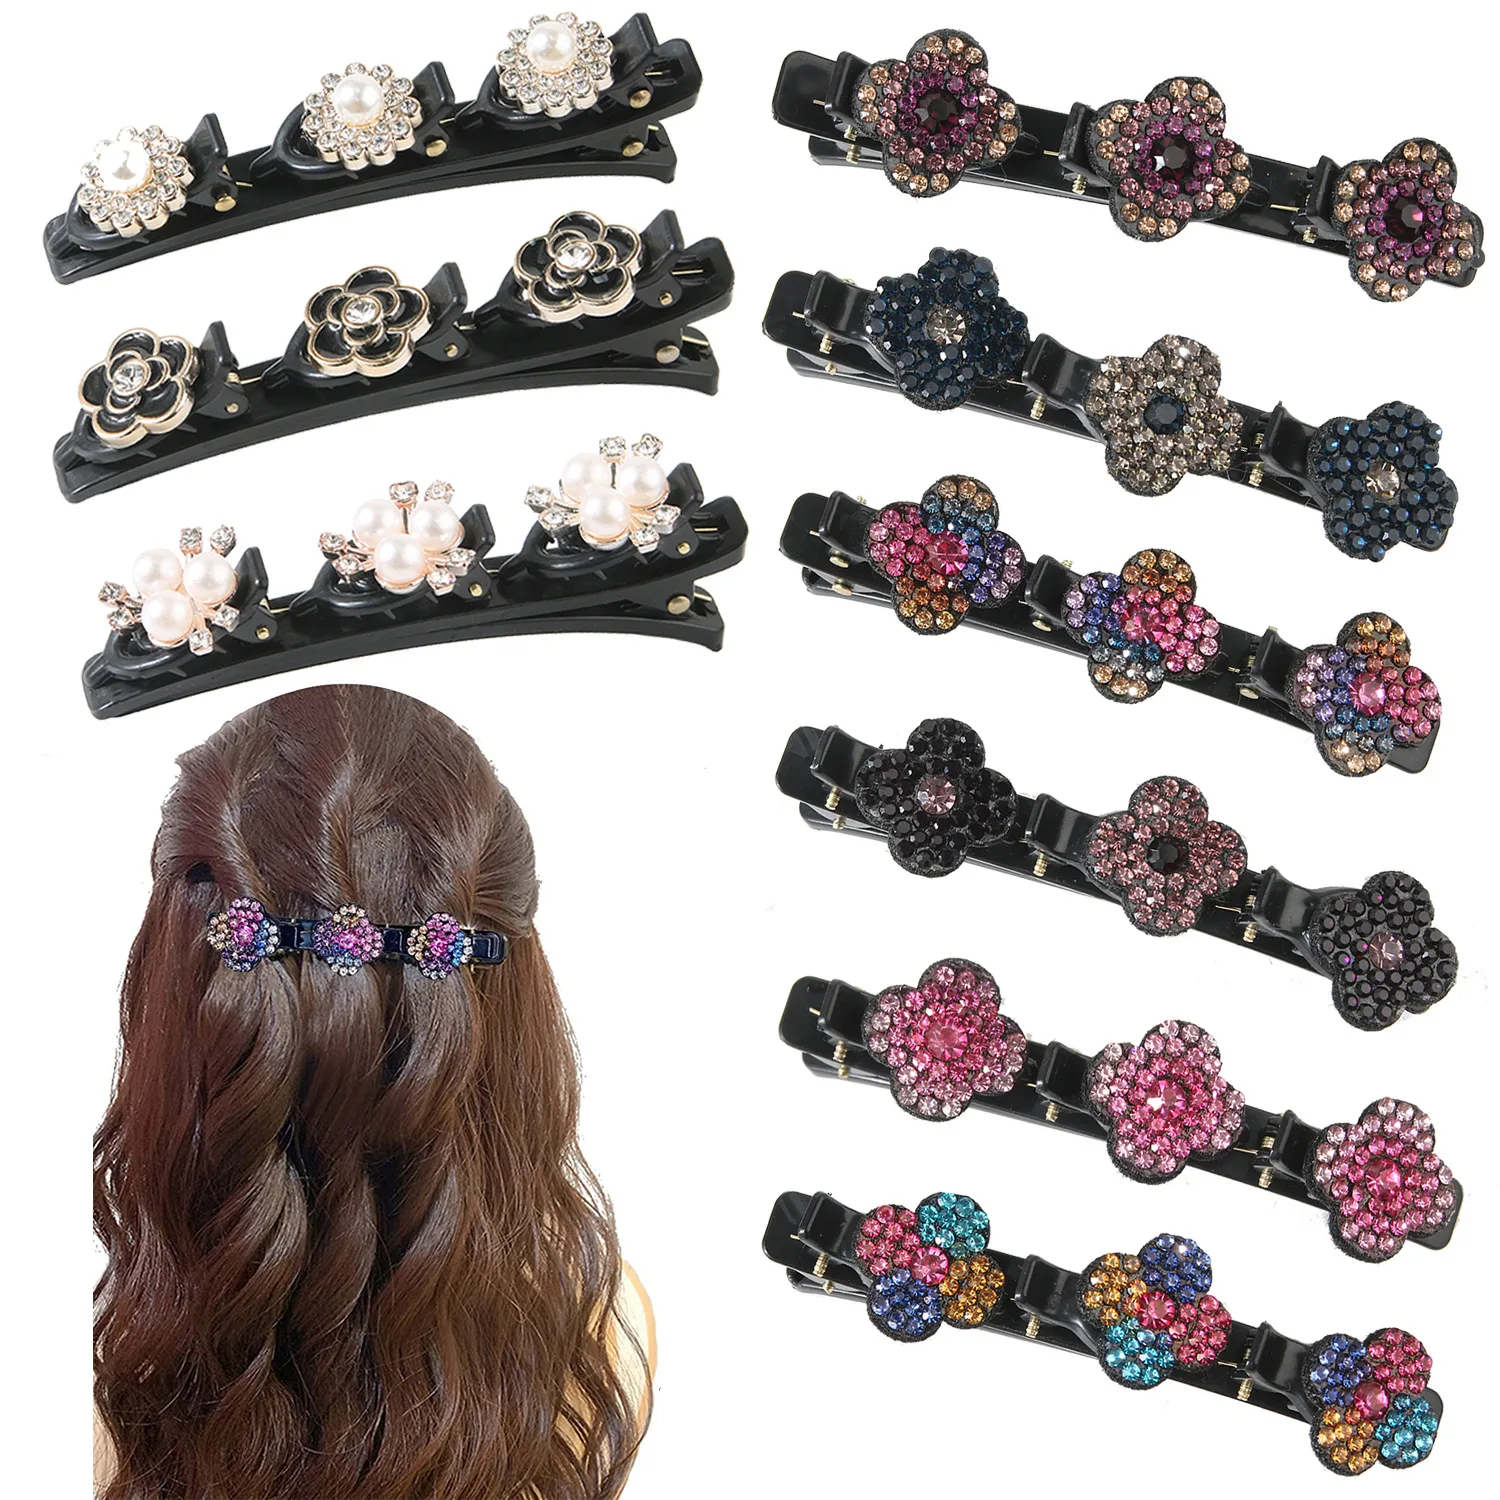 

Crystal Braided Hair Clips Glitter Shiny Bangs Duckbill Hairpins with 3 Small Clips Rhinestones Bangs Clip Barrettes for Girls